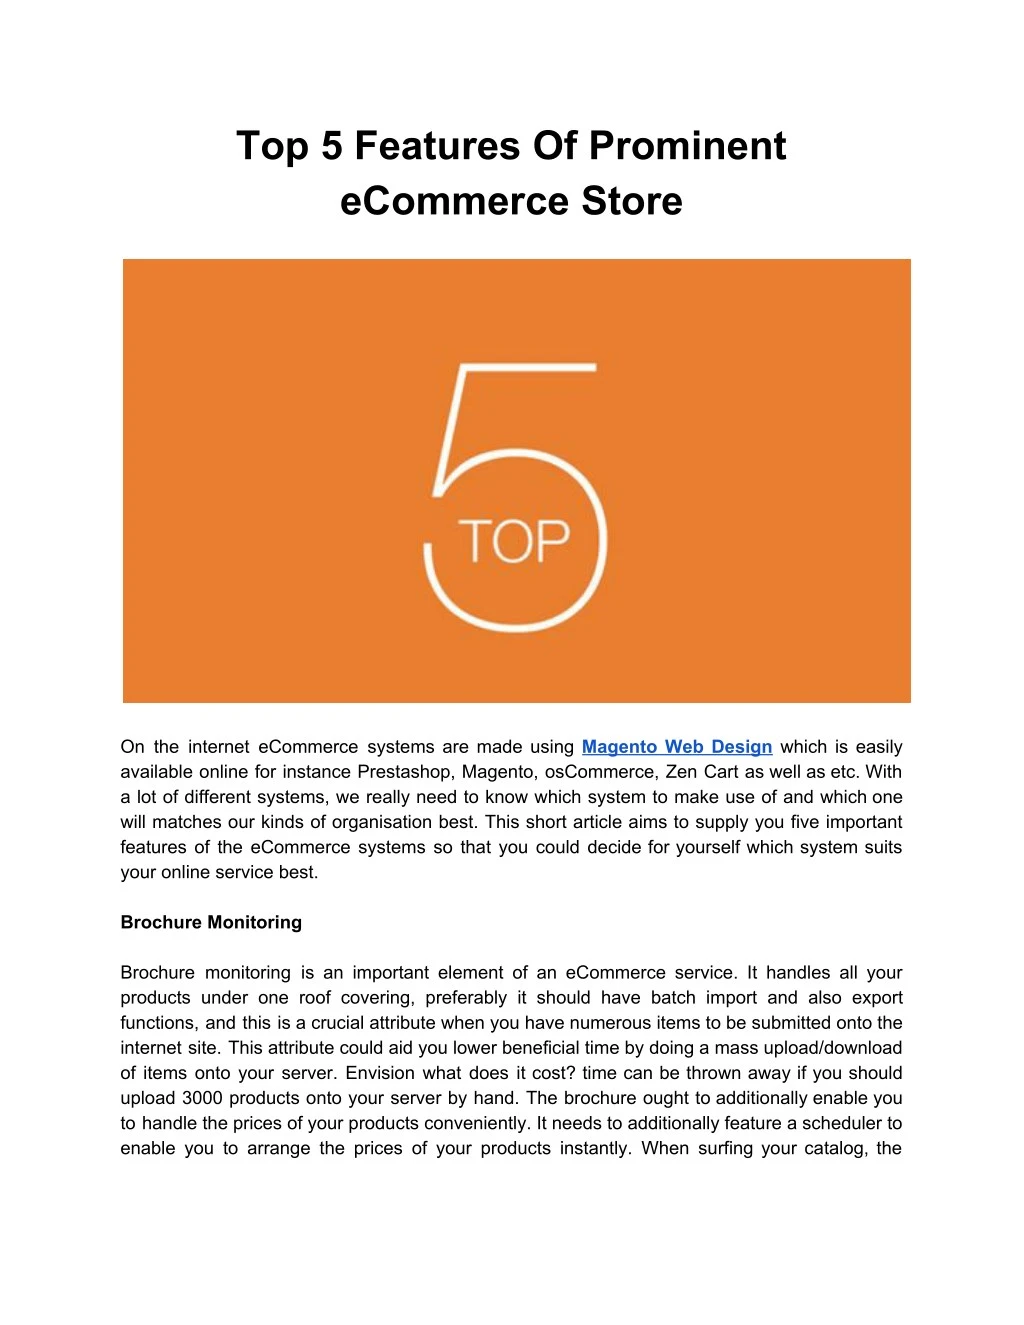 top 5 features of prominent ecommerce store